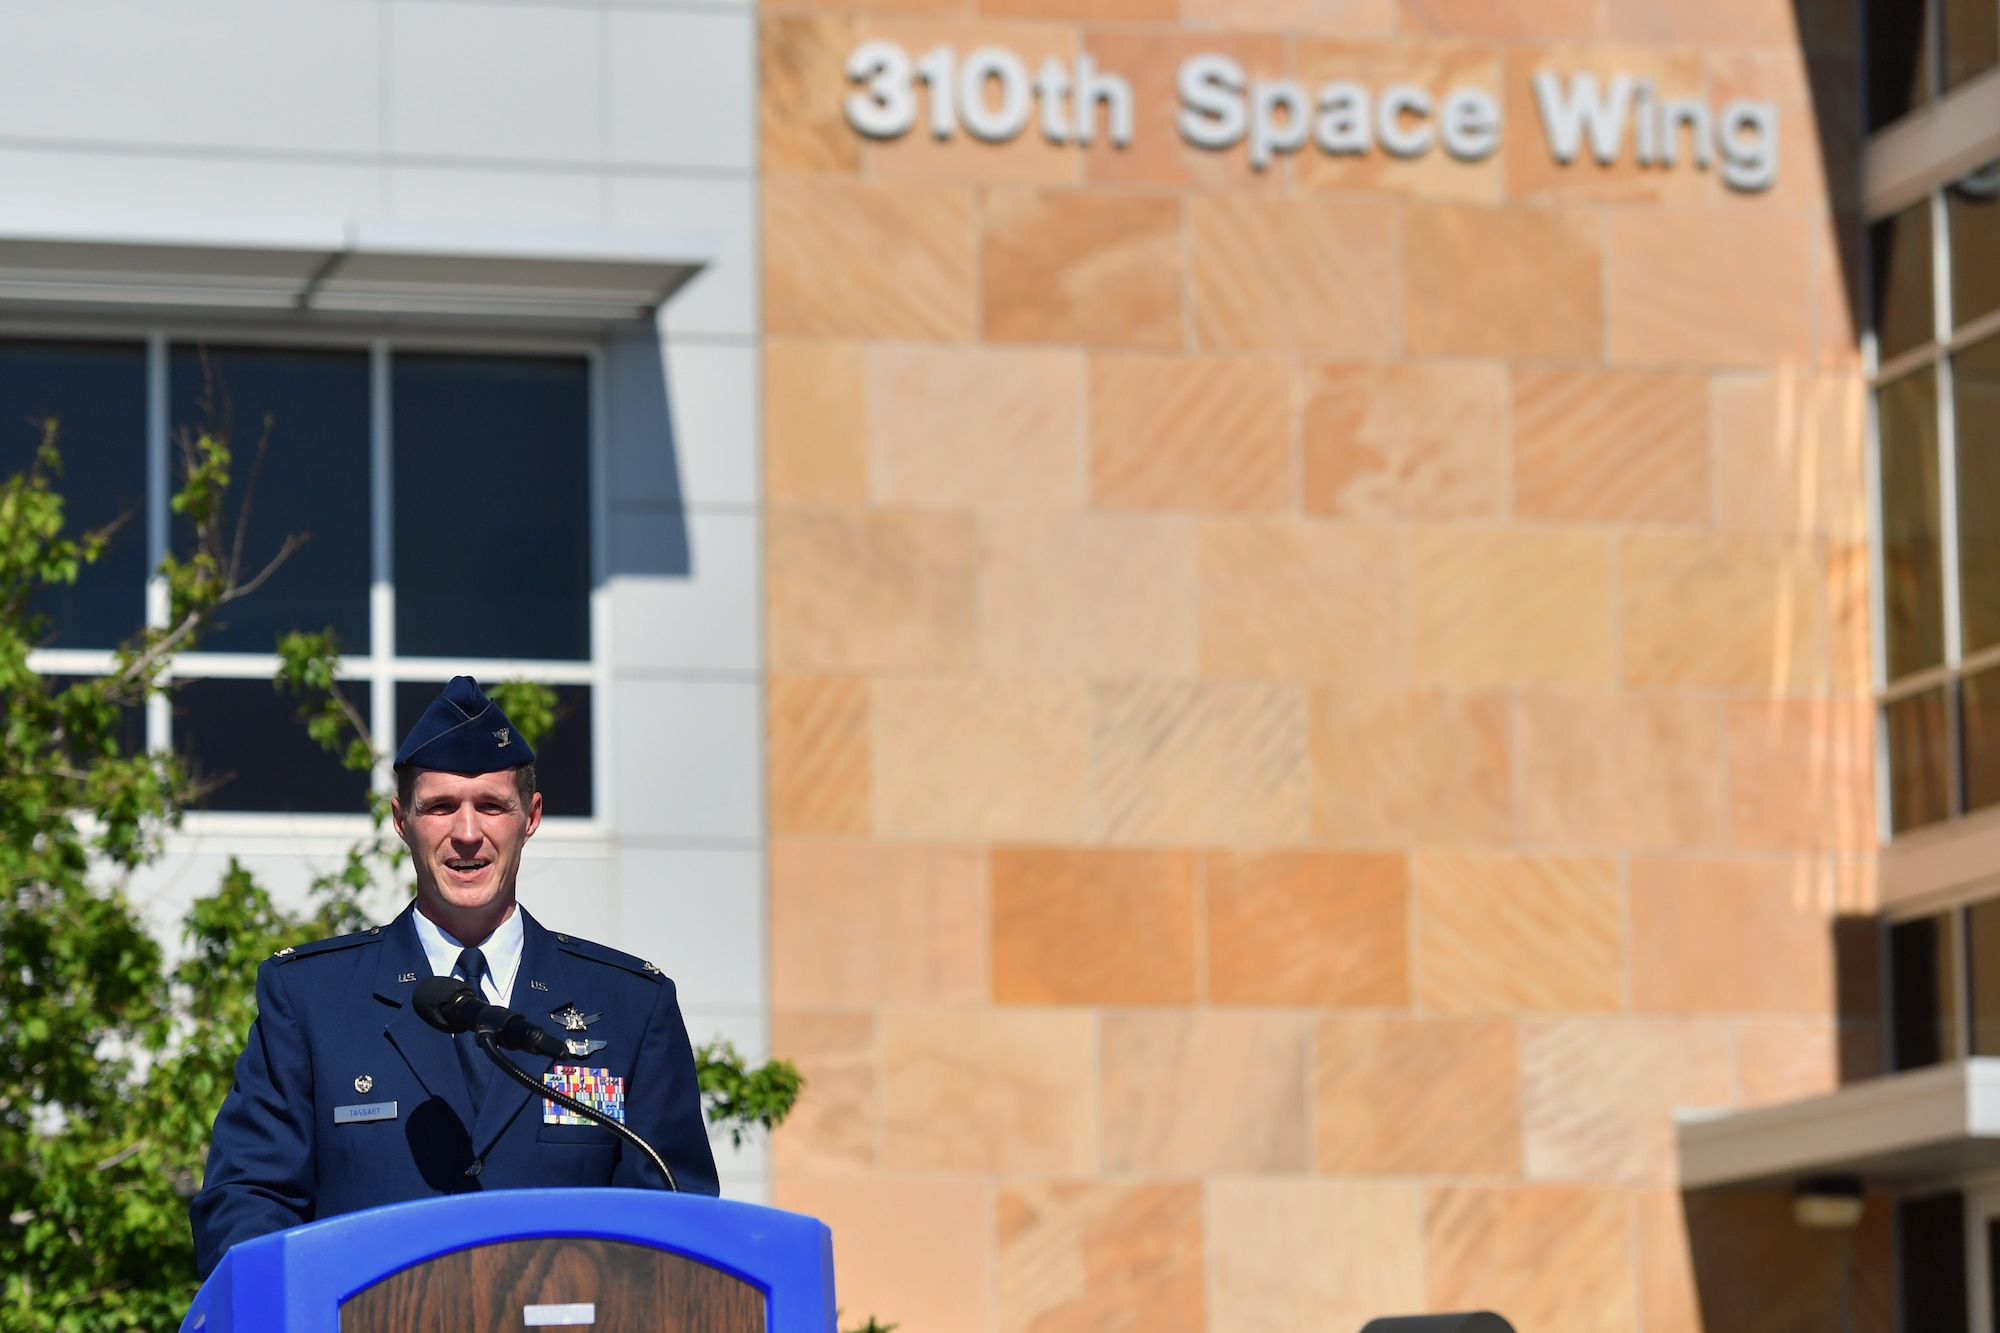 A man speaking outside a building standing behind a podium.